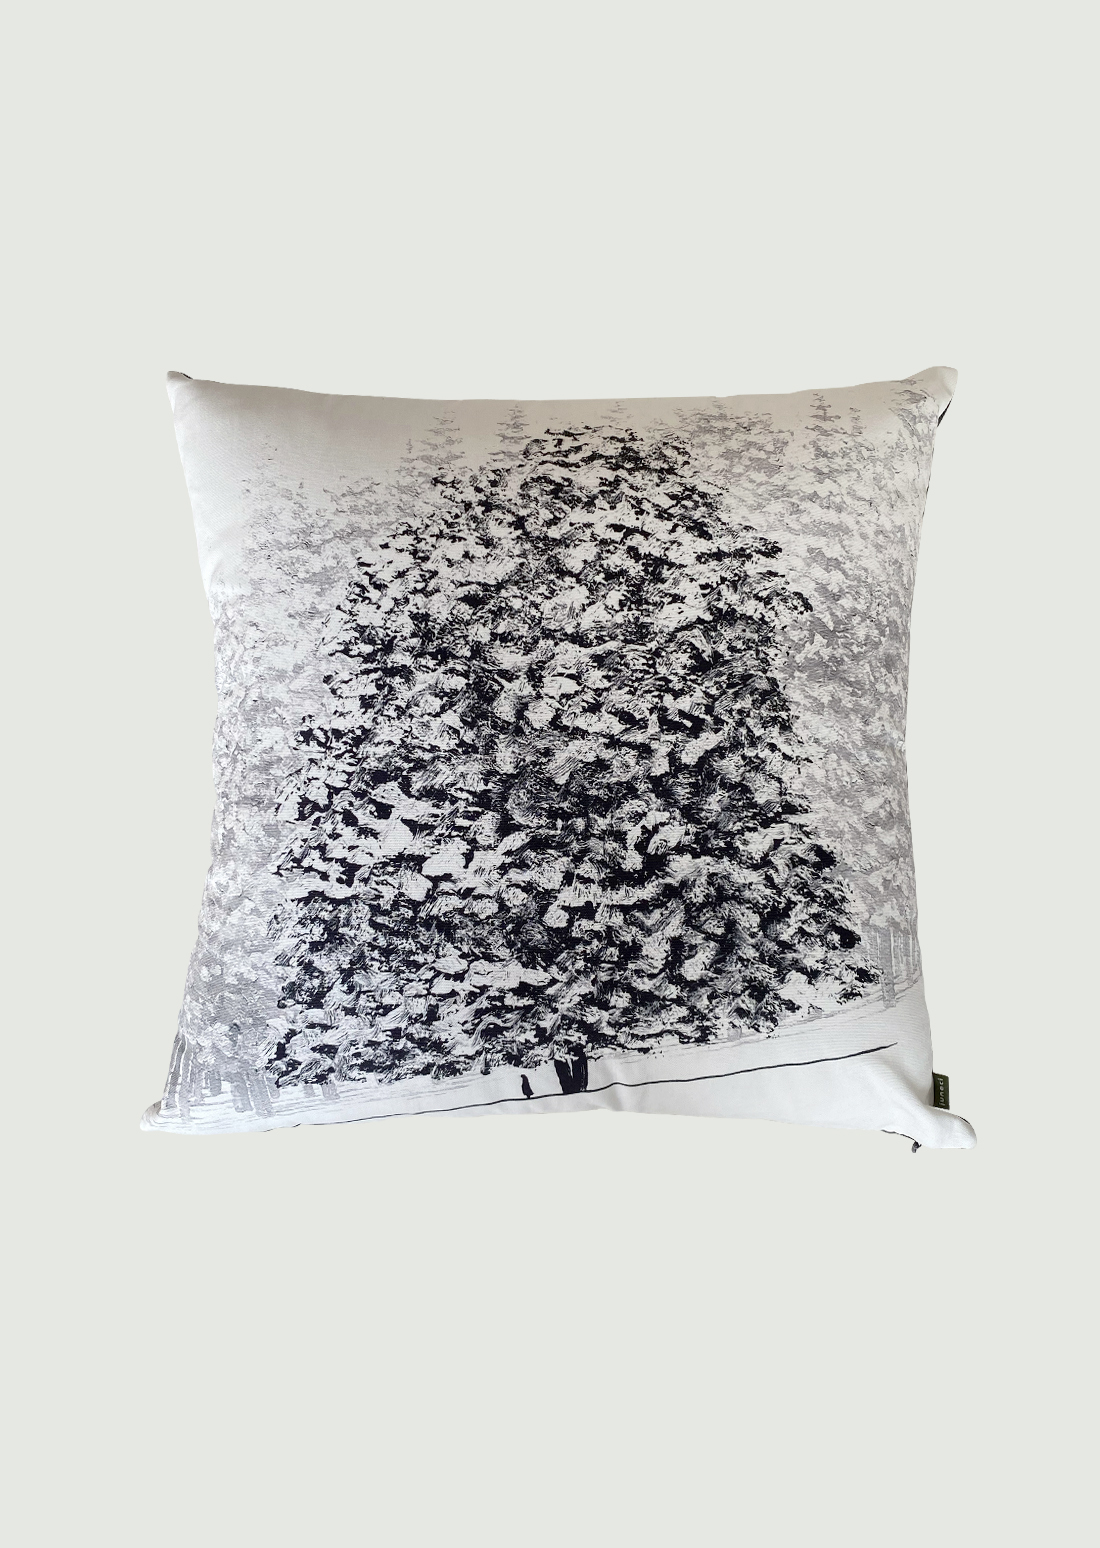 &#039;under the tree&#039; Son Jung Kee cushion